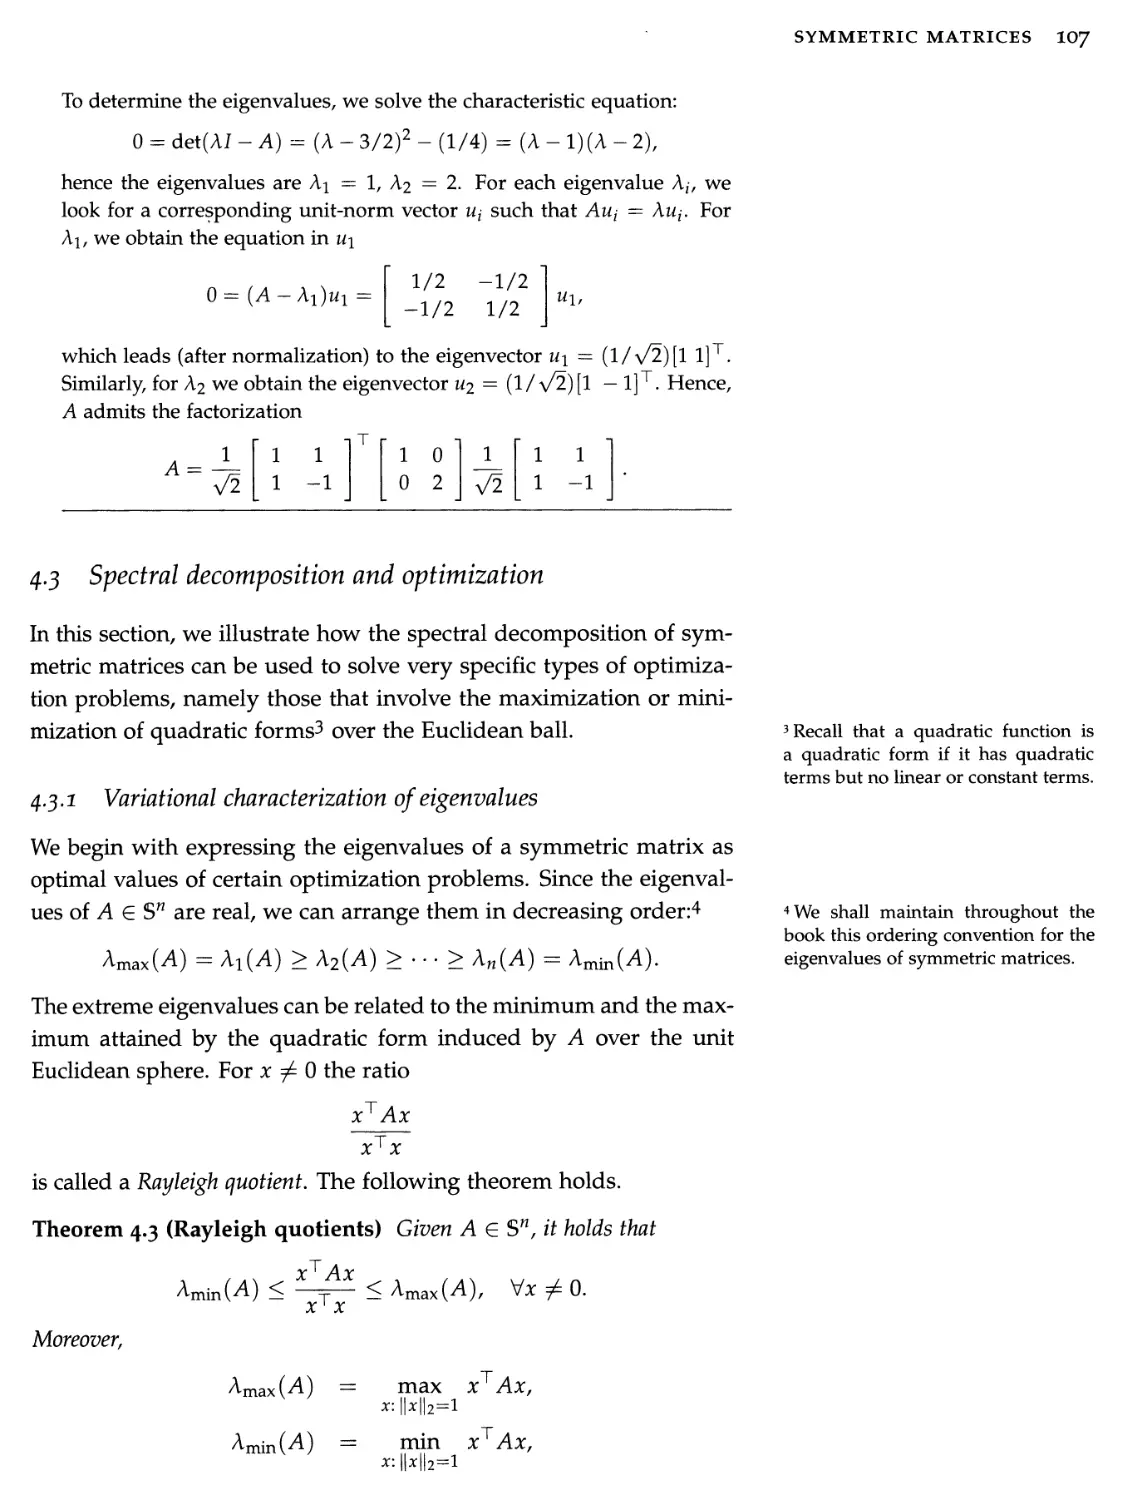 4.3 Spectral decomposition and optimization 107